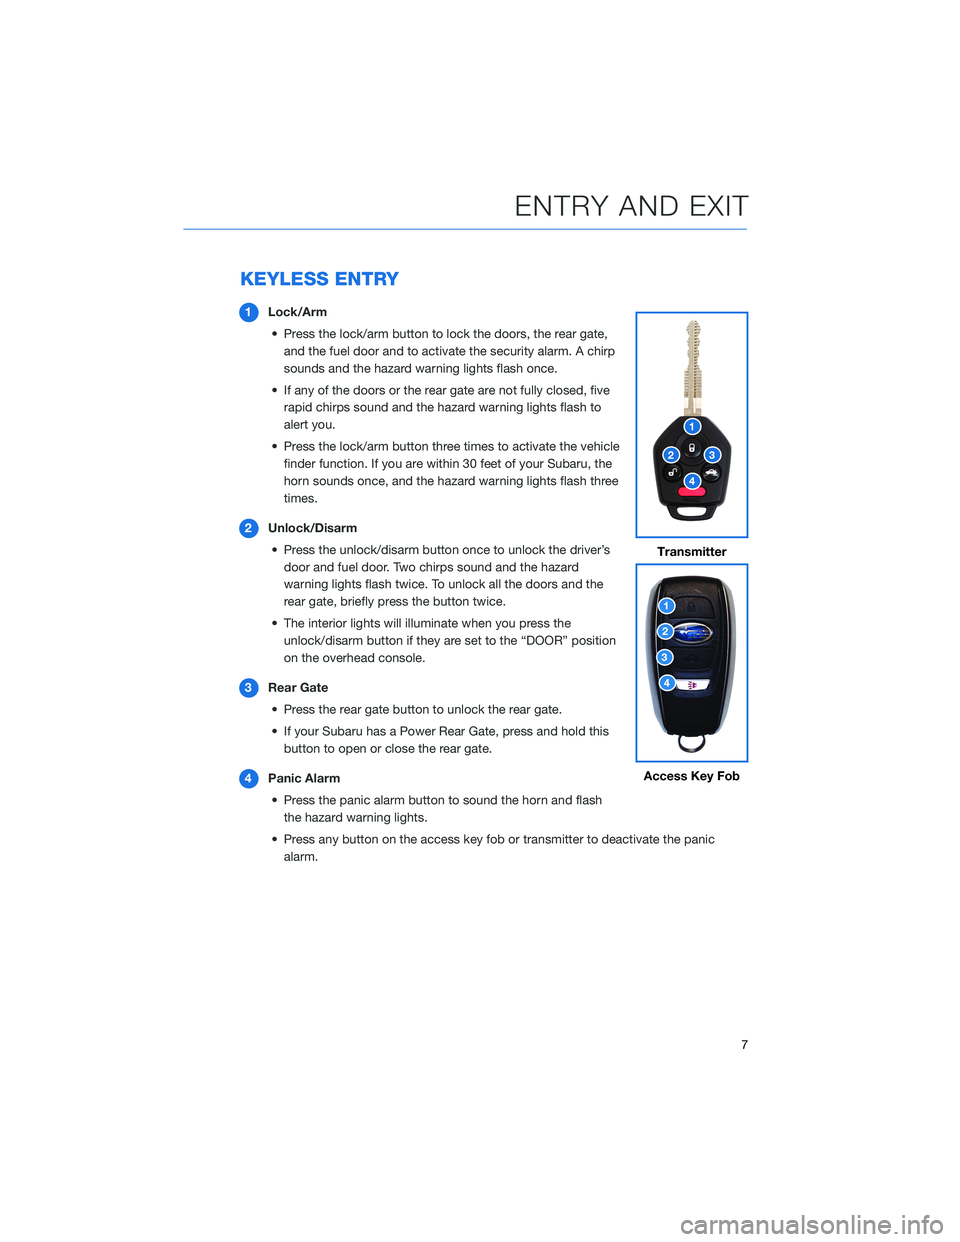 SUBARU FORESTER 2022  Getting Started Guide KEYLESS ENTRY
1Lock/Arm
• Press the lock/arm button to lock the doors, the rear gate, and the fuel door and to activate the security alarm. A chirp
sounds and the hazard warning lights flash once.
�